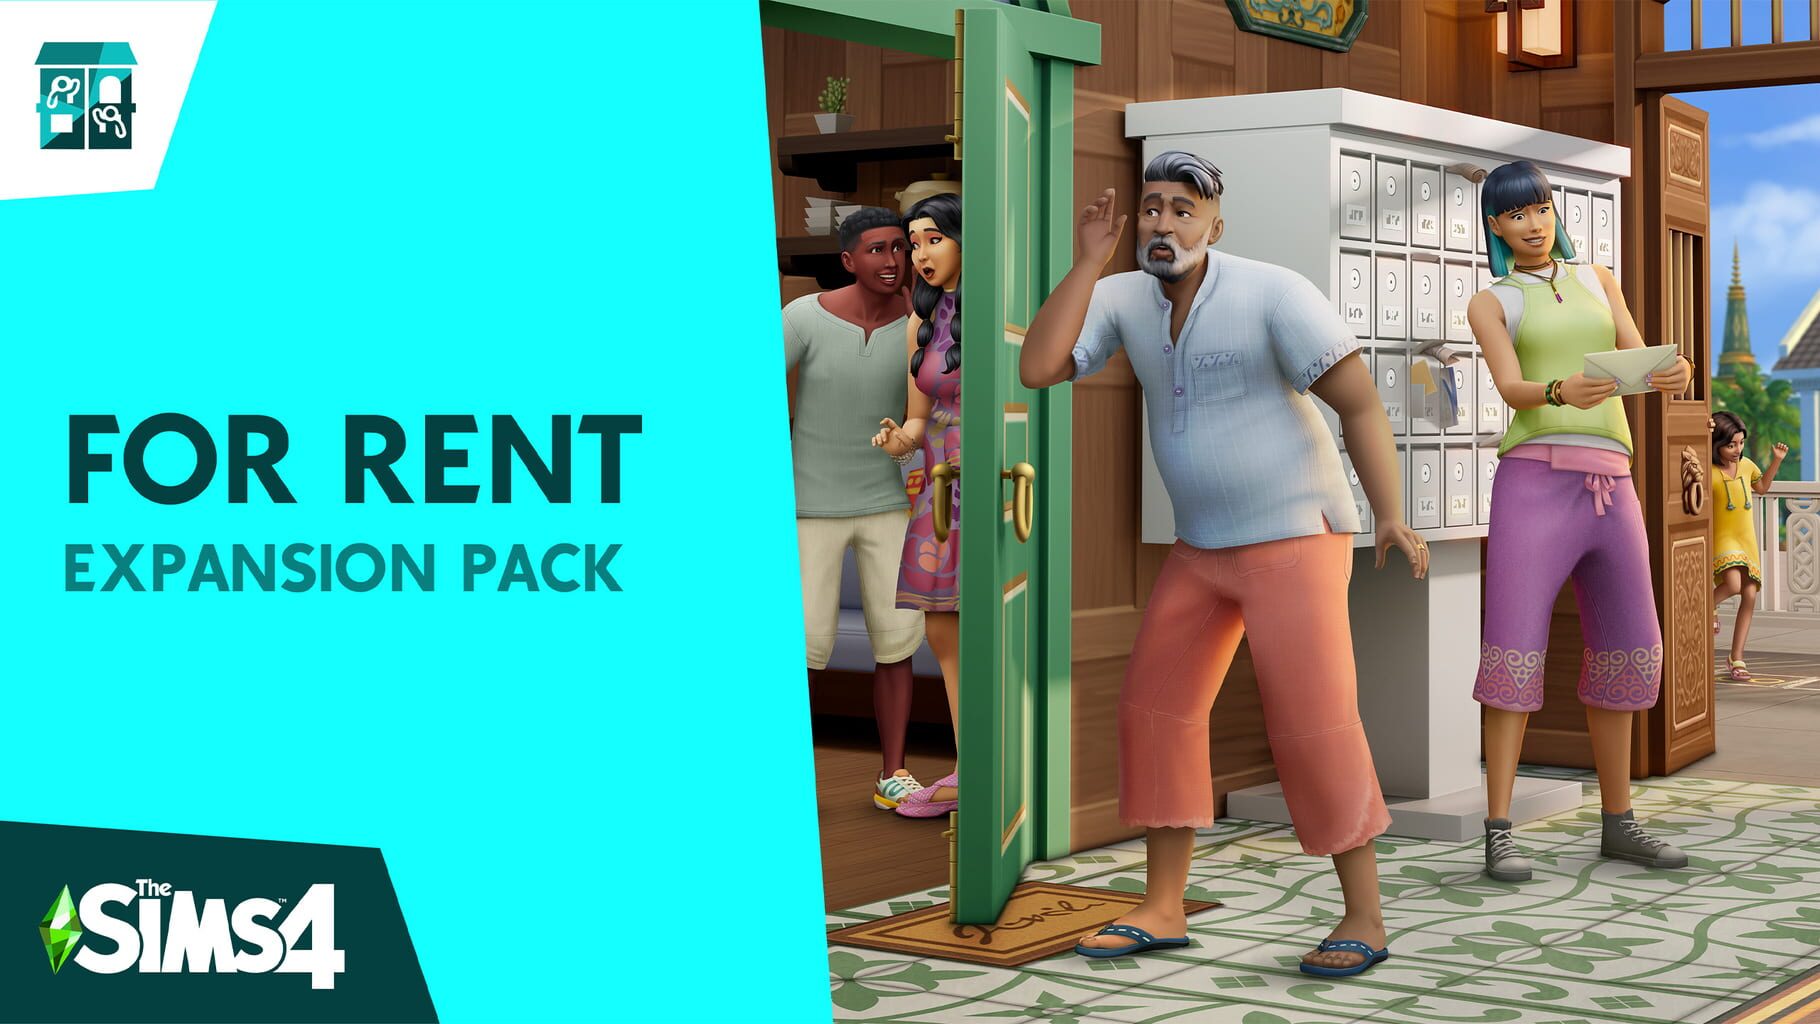 Arte - The Sims 4: For Rent